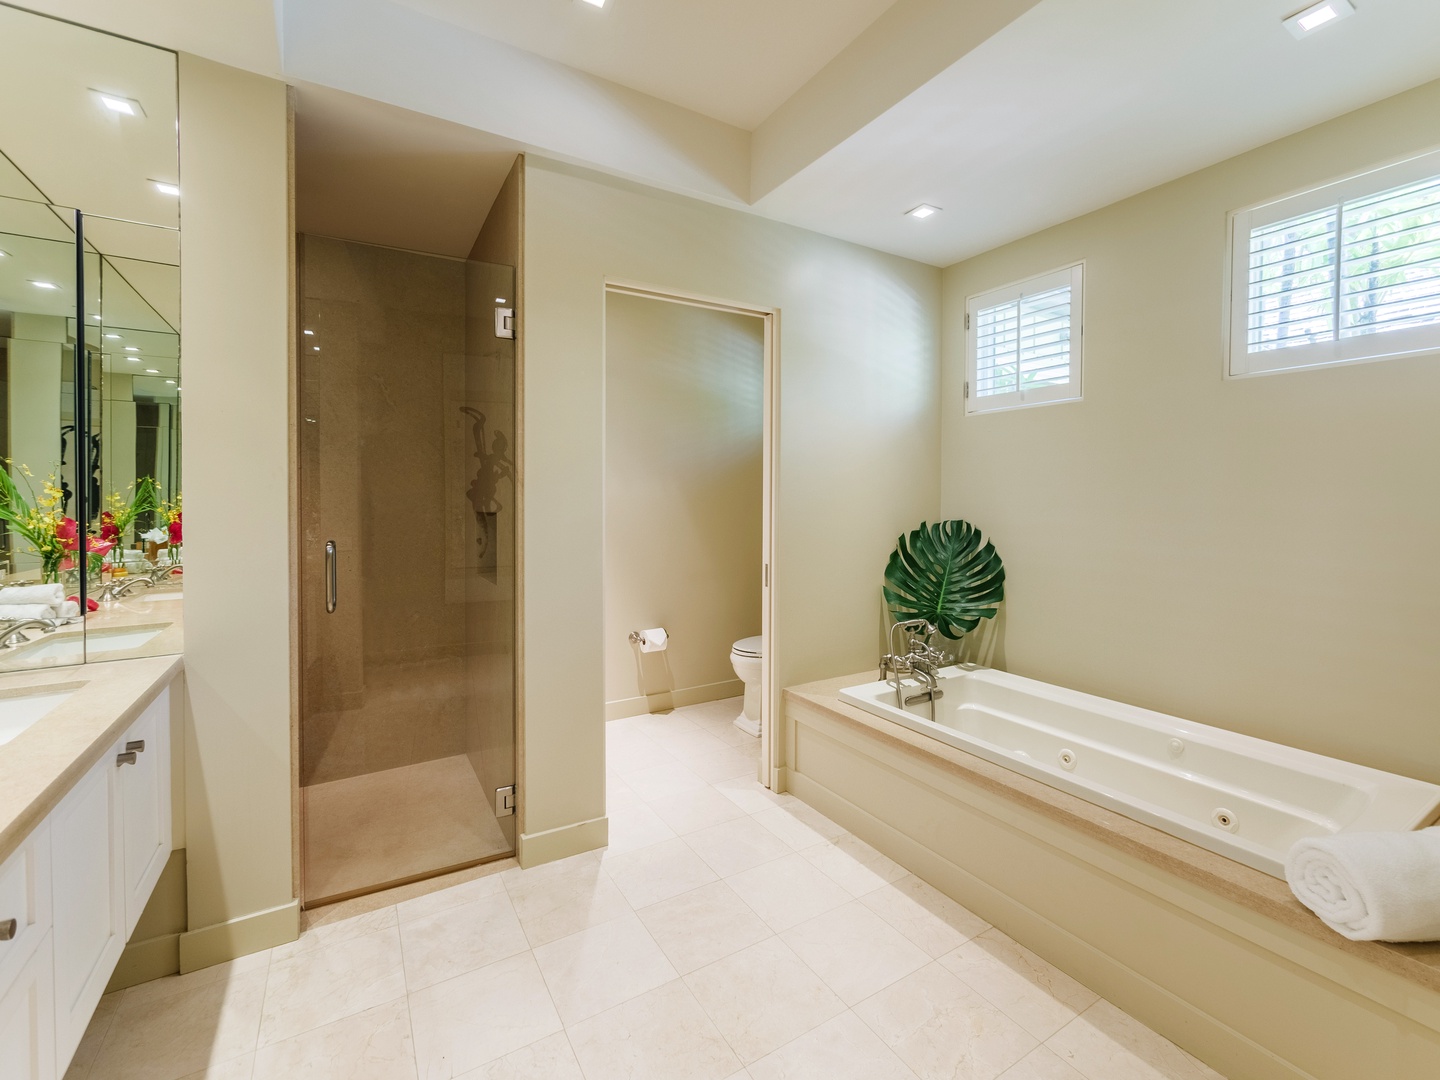 Honolulu Vacation Rentals, Paradise Beach Estate - Dive into luxury in the expansive ensuite bathroom, complete with a sumptuous tub for long soaks and a walk-in shower for invigorating refreshment.